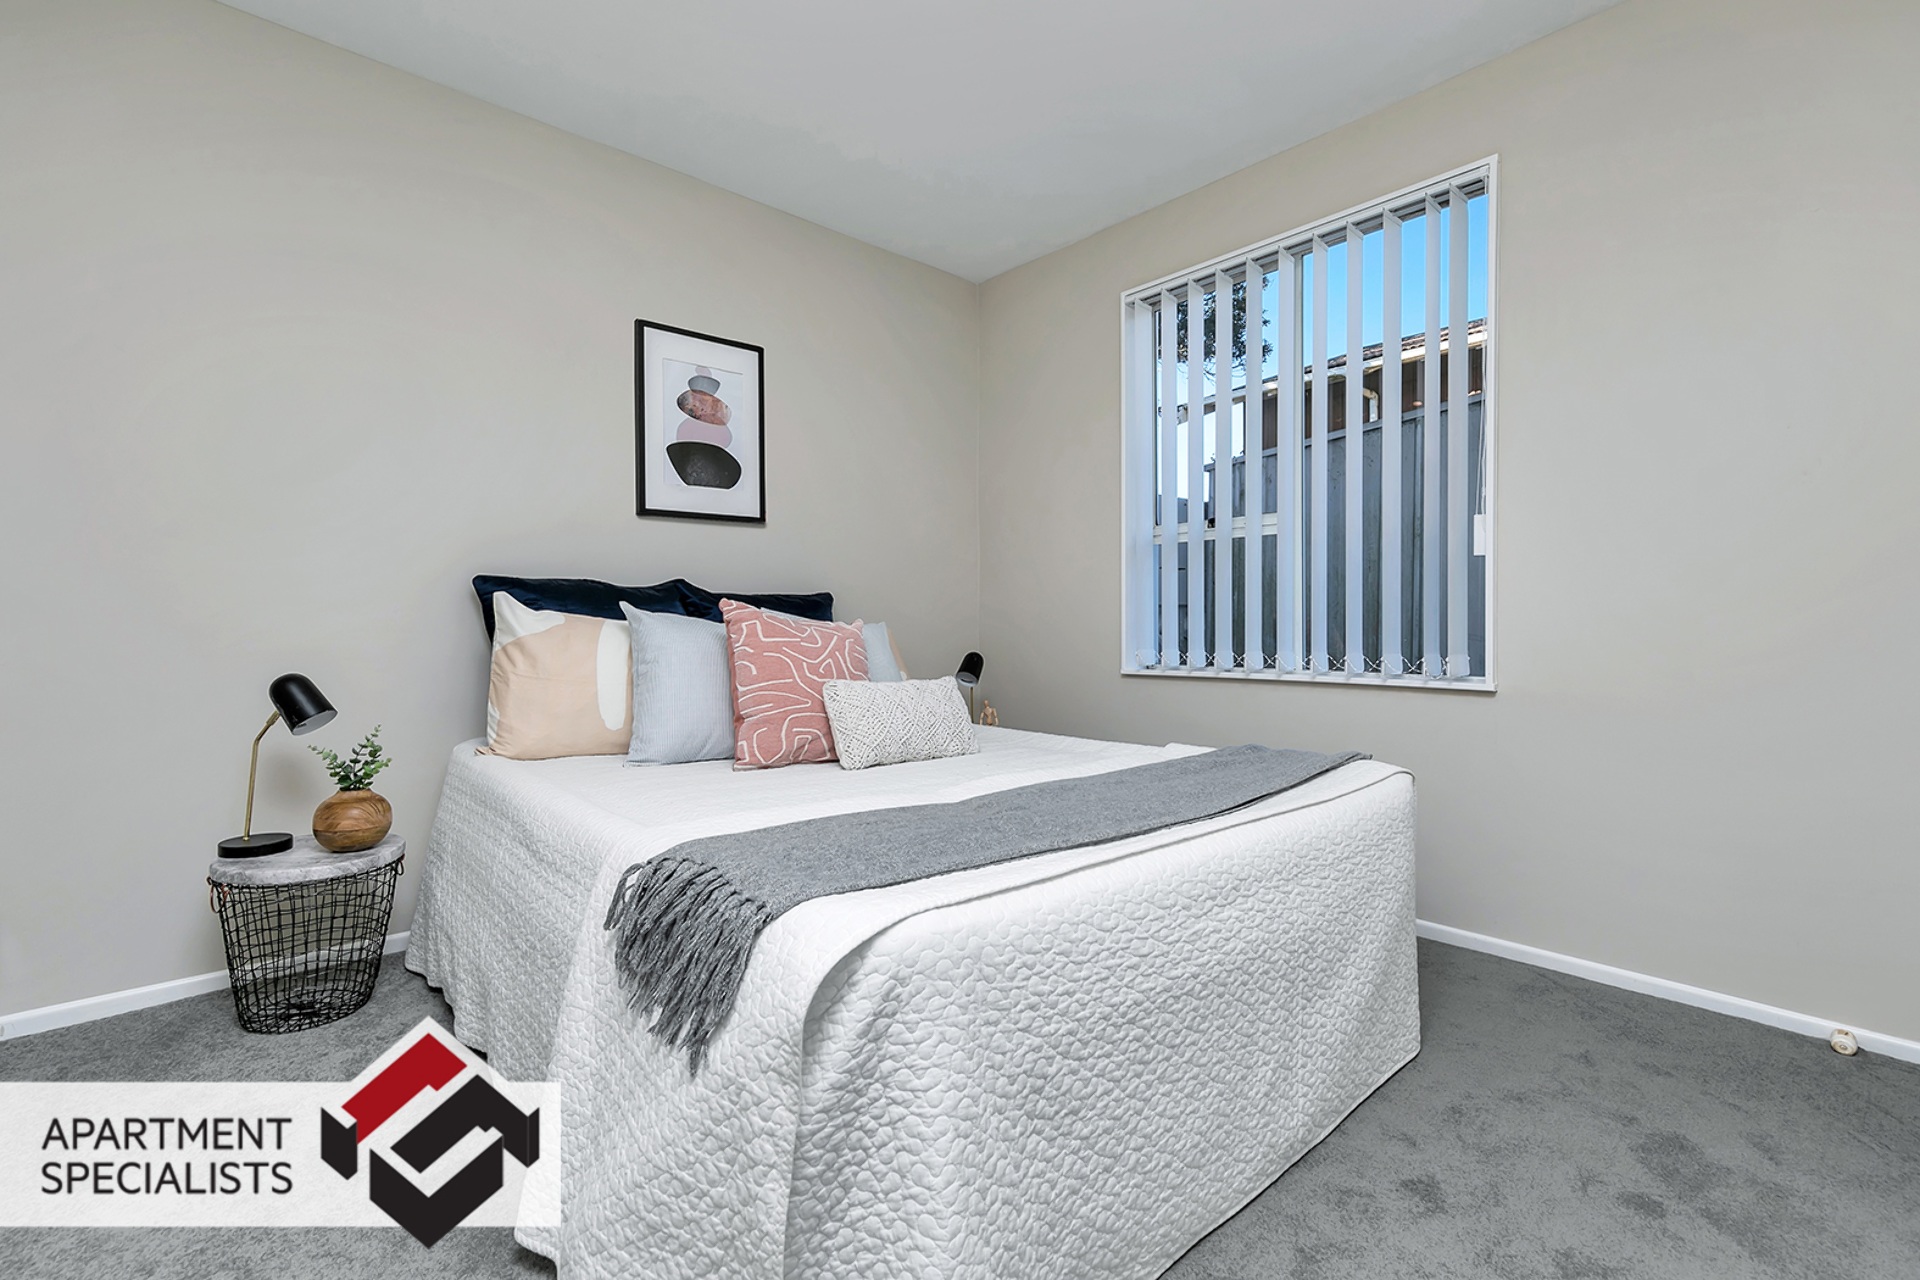 10 | 325 Mount Albert Road, Mount Roskill | Apartment Specialists